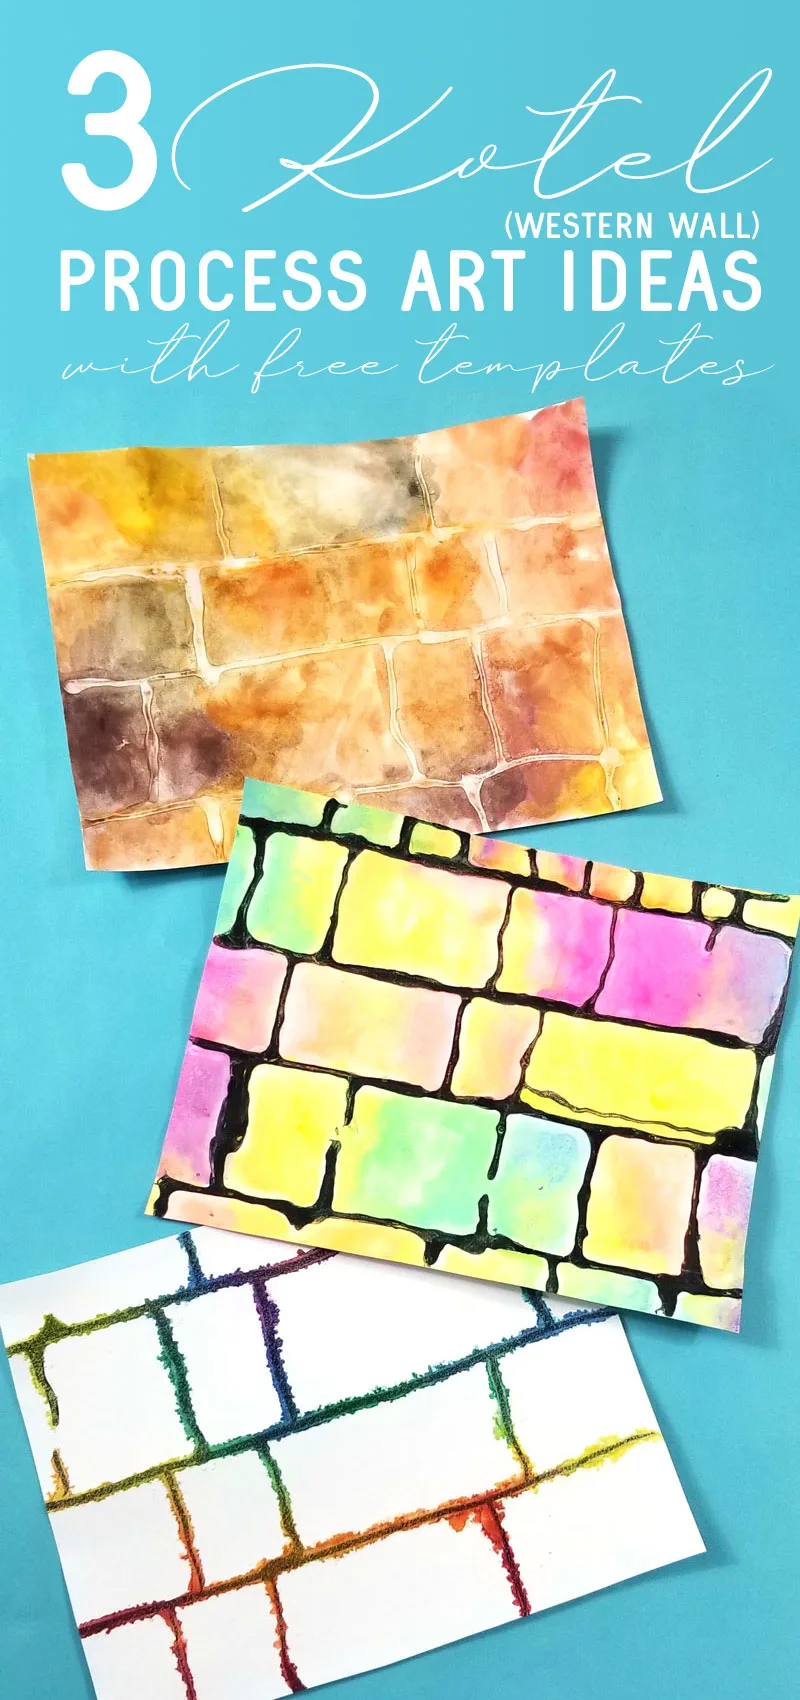 Click for a free template to make three kotel process art projects - fun Jewish art projects for kids and adults! These watercolor process arts are a great idea for Hebrew School, Tishah B'av crafts, Sukkah decorations, and for Israel themed celebrations.